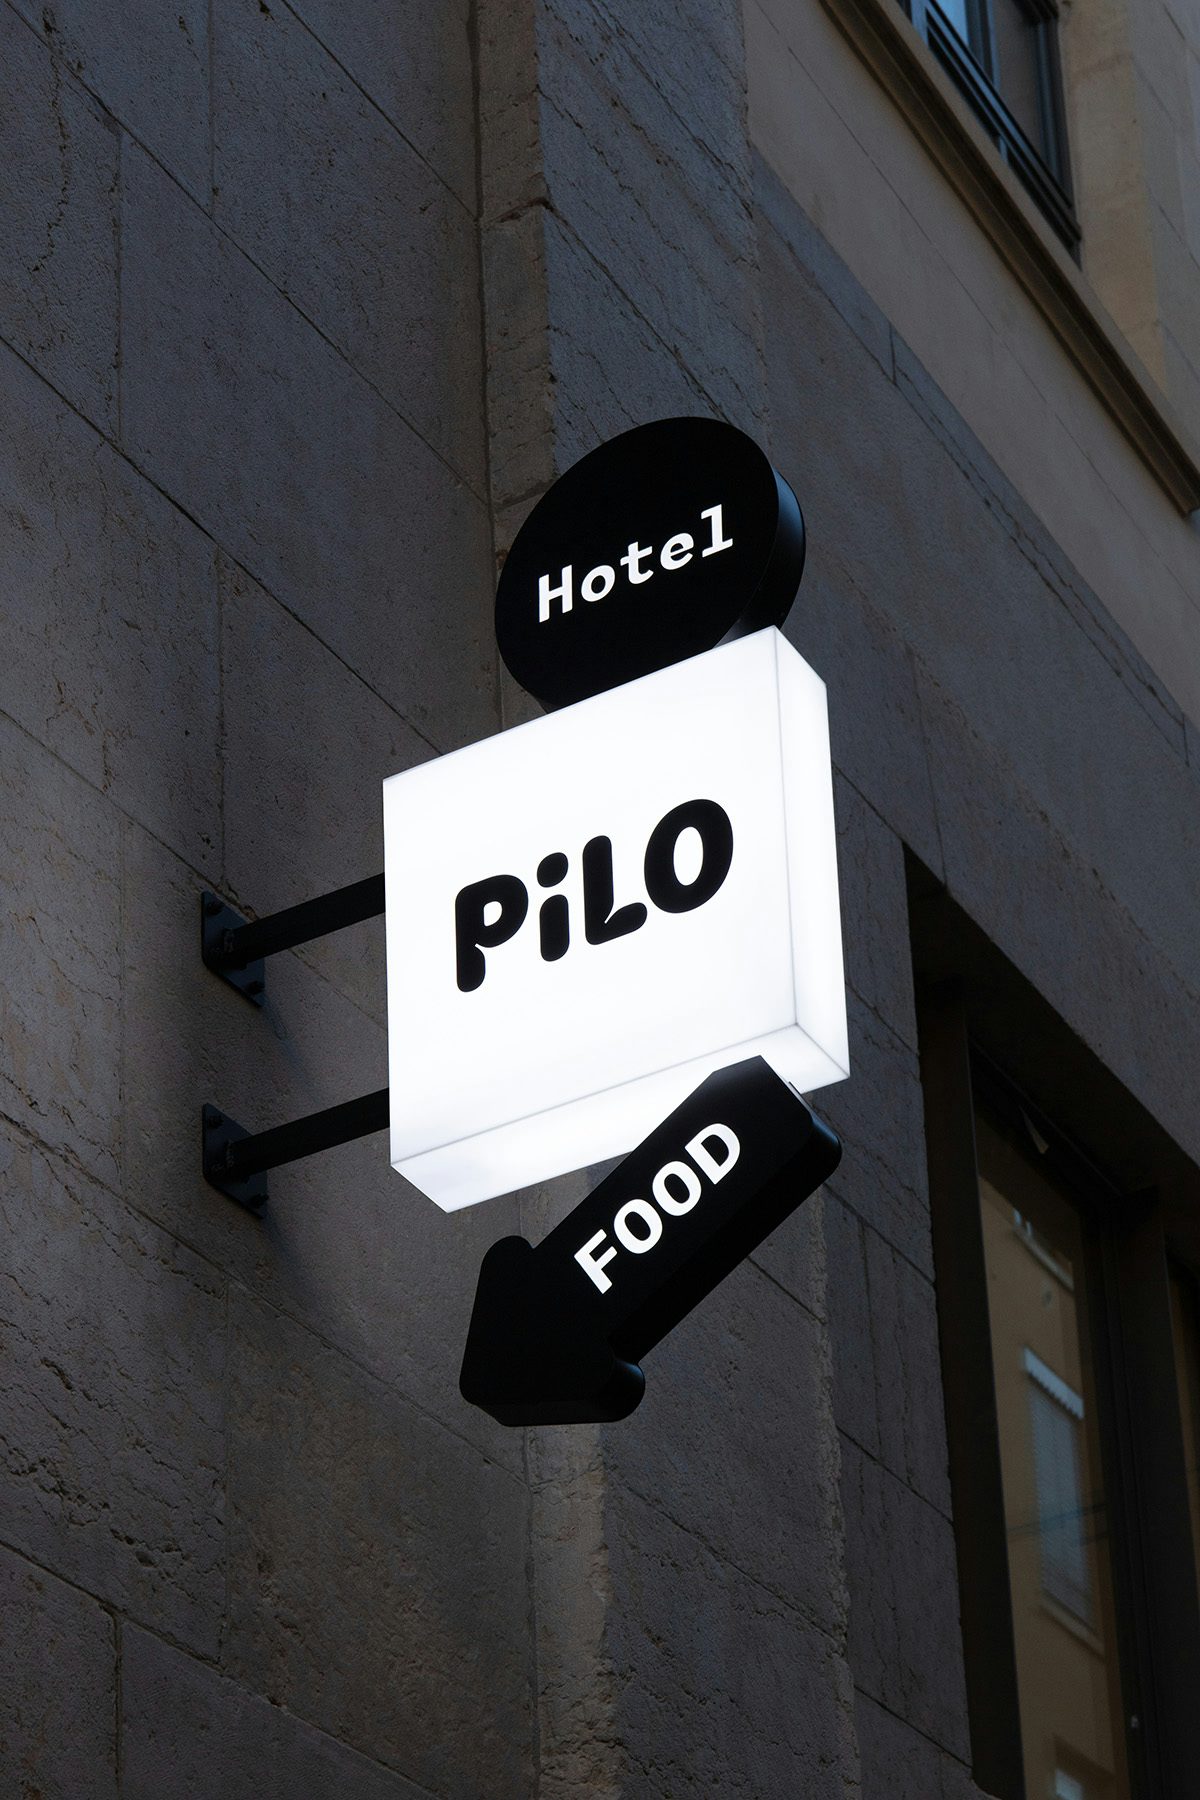 Photo of a Pilo hostel sign fixed to a wall, with additional signs that read hotel and food